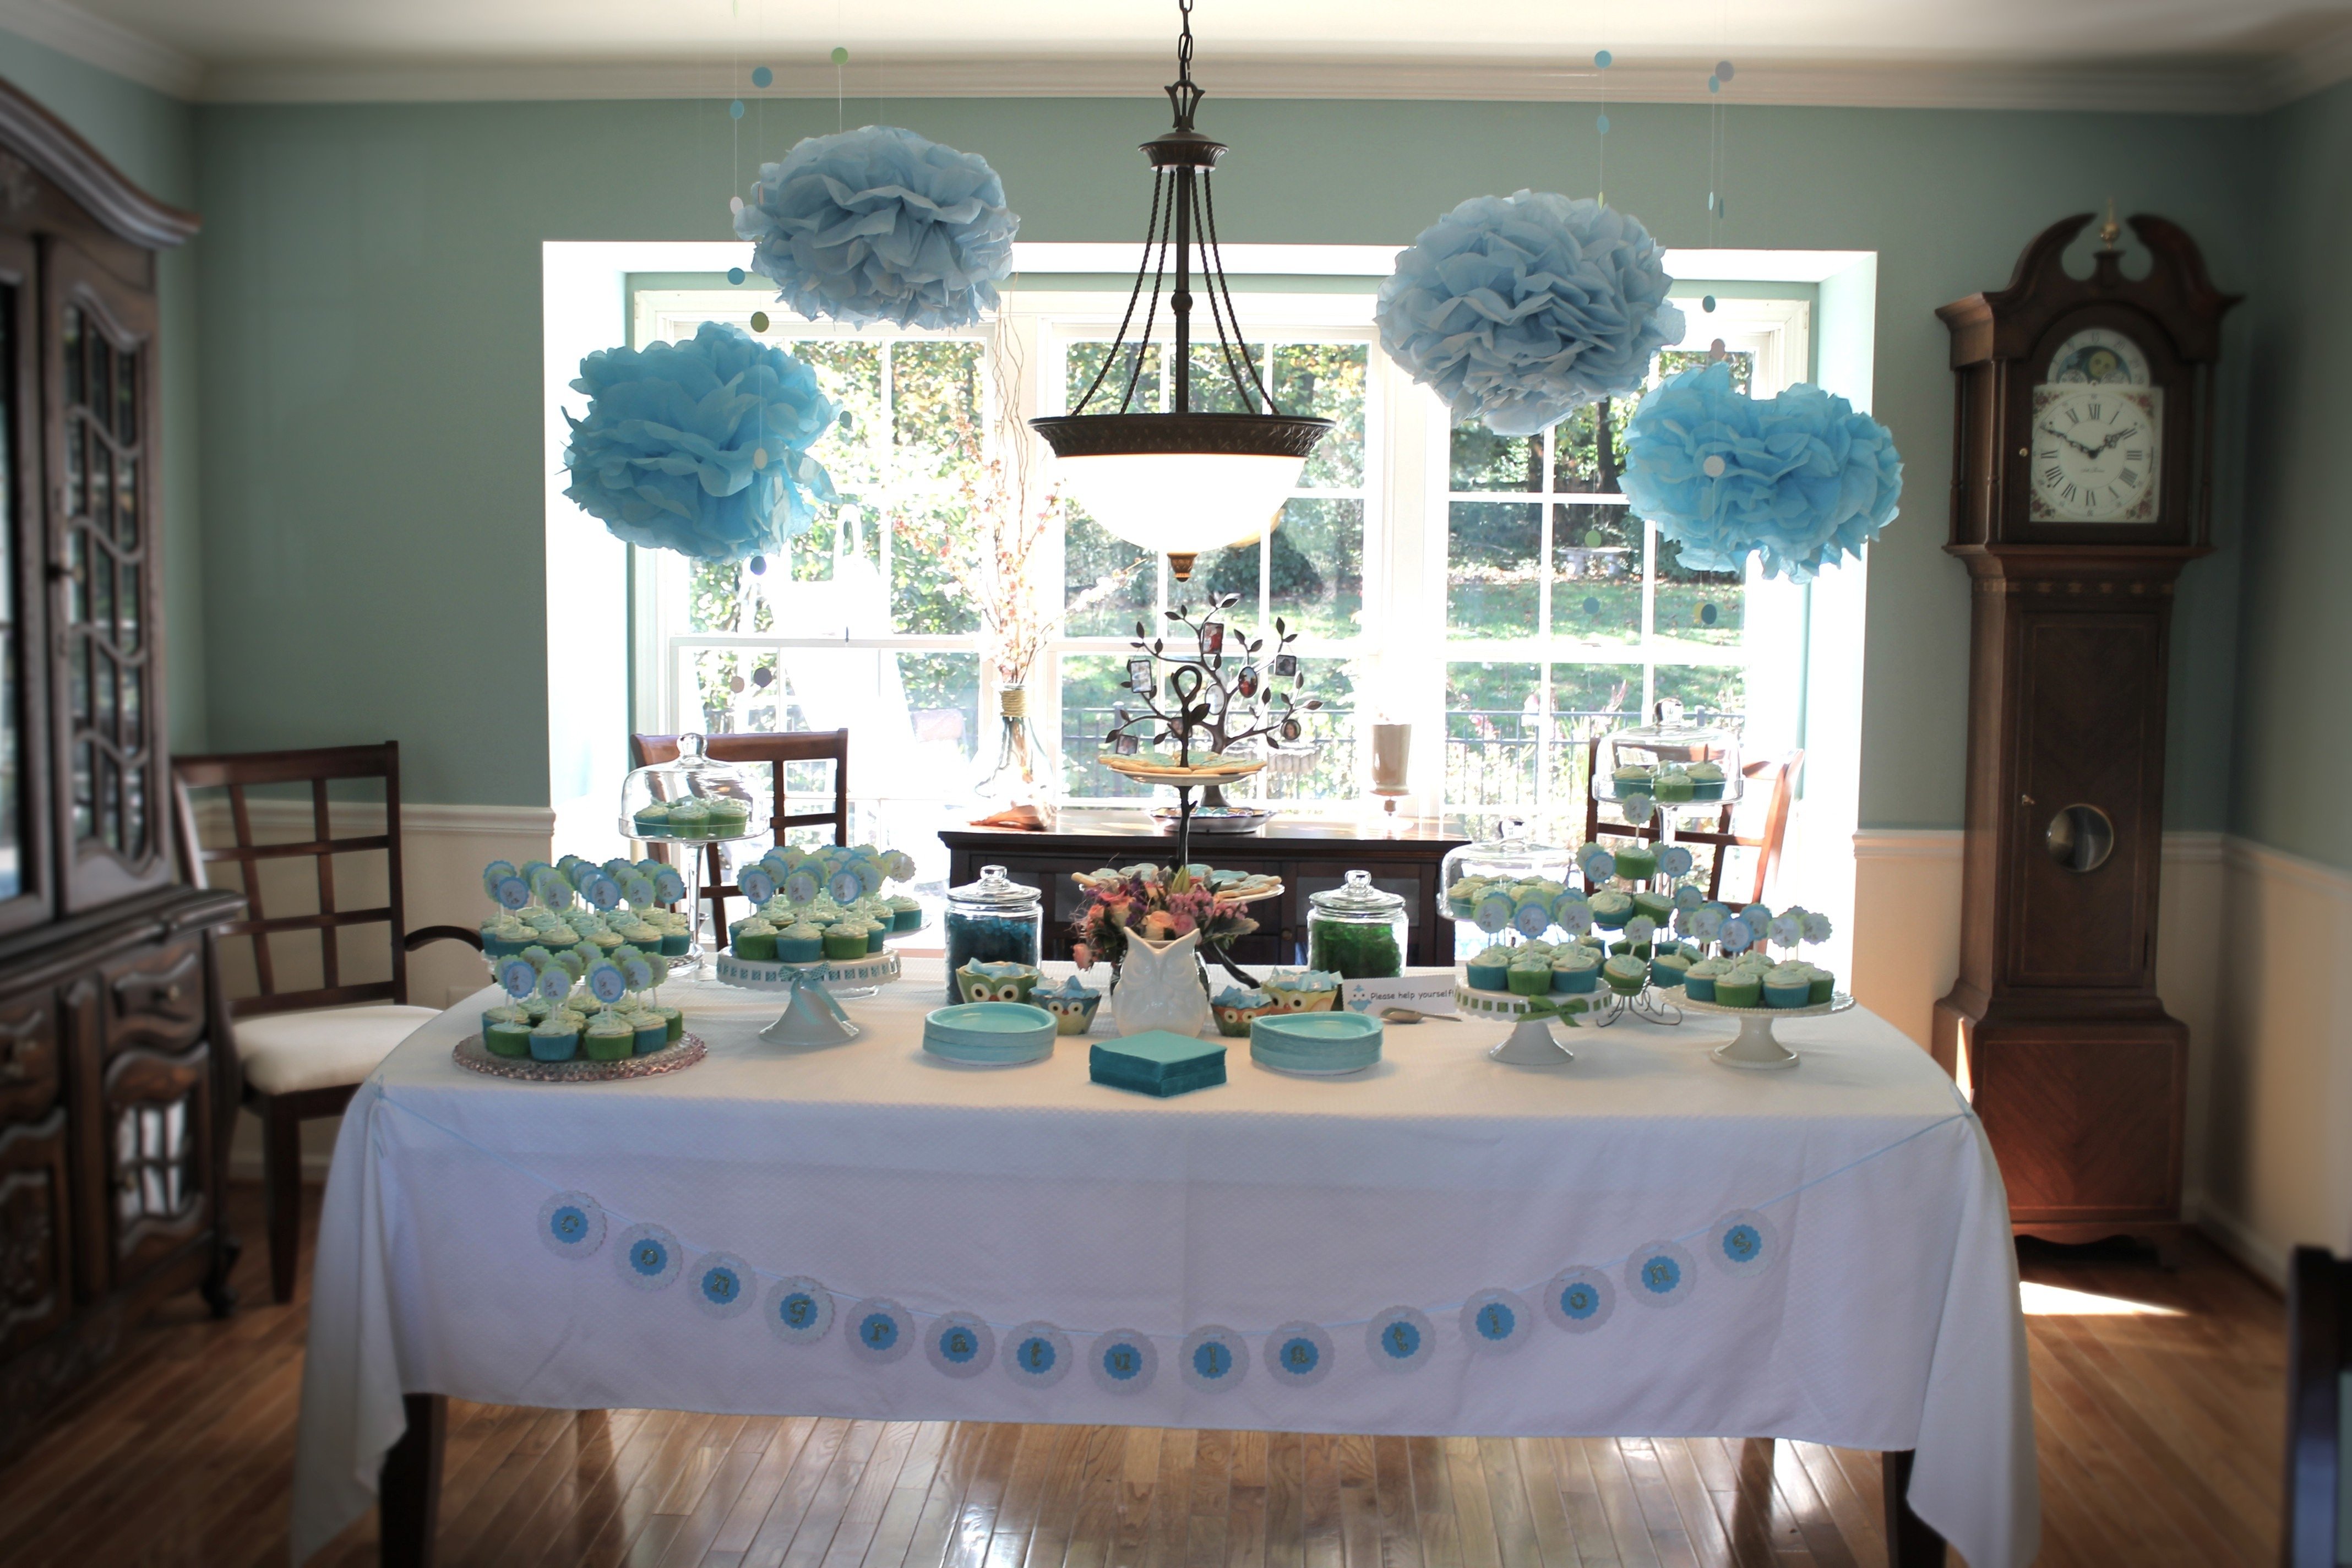 10 Fantastic Baby Shower Decorating Ideas For Boys boy baby shower decorations inspirational owl themed baby shower 2022